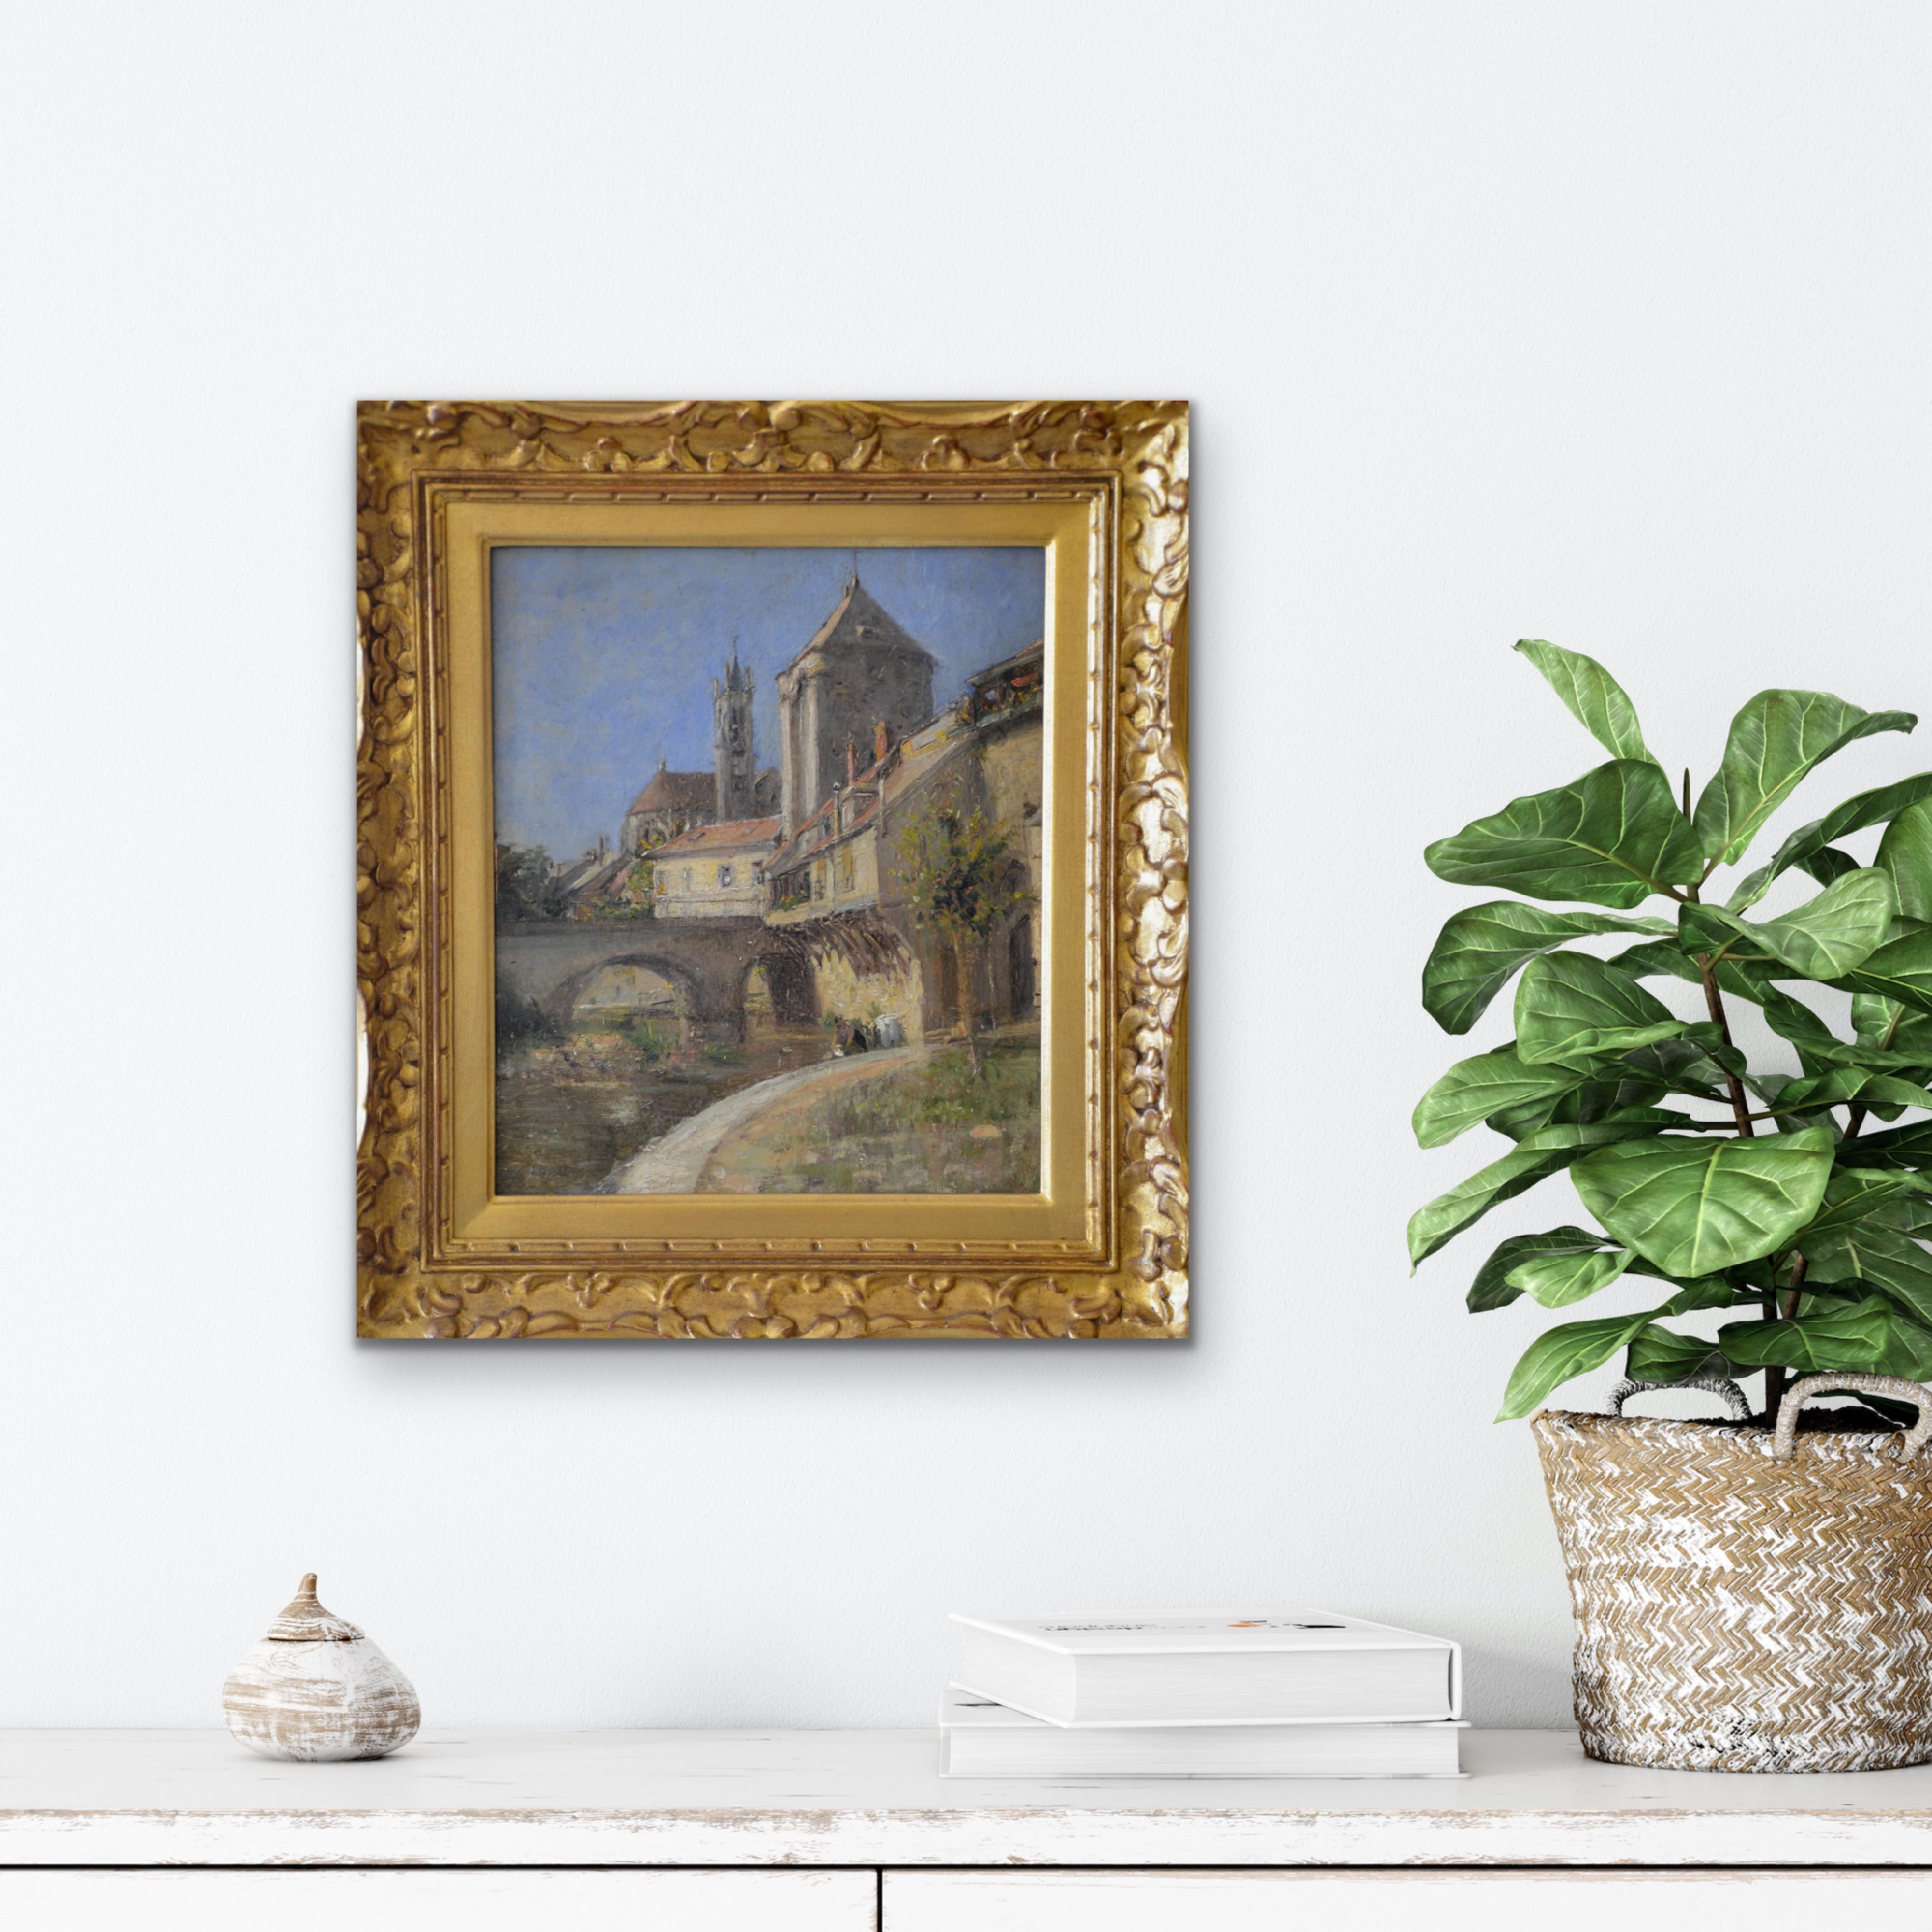 A lovely French Impressionist painting from the 19th century. Painted in the style of Alfred Sisley and Gustave Loiseau. 
What may be the remnants of a signature can be found in the lower left corner. 
The painting is in fine condition and the